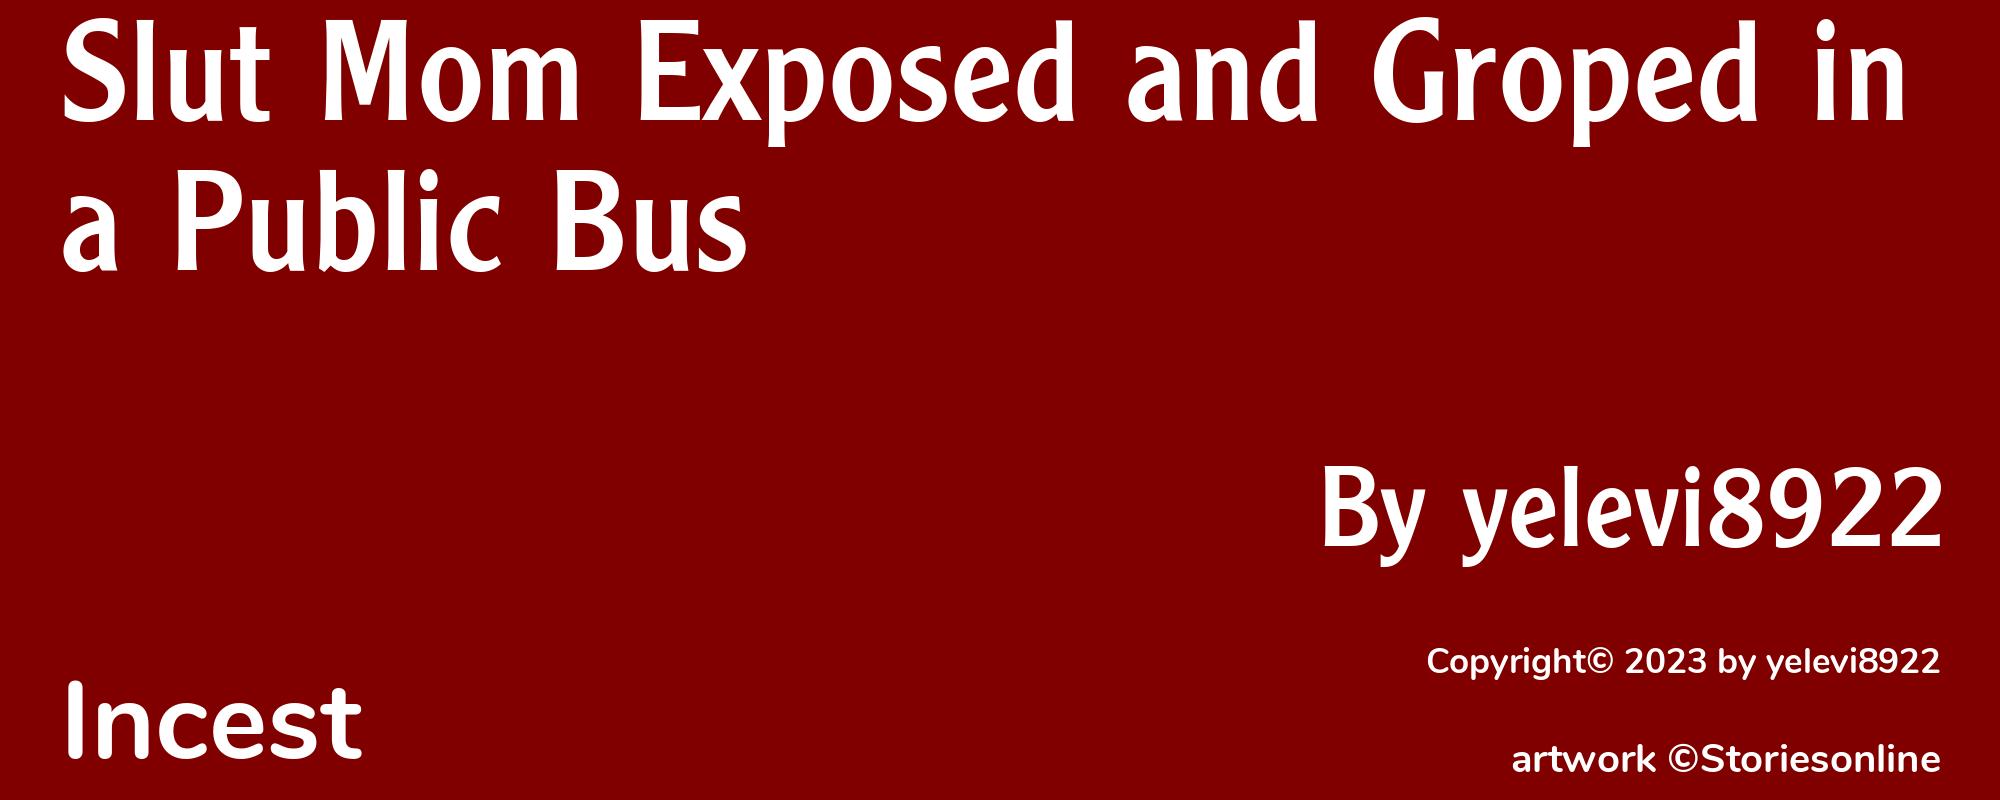 Slut Mom Exposed and Groped in a Public Bus - Cover